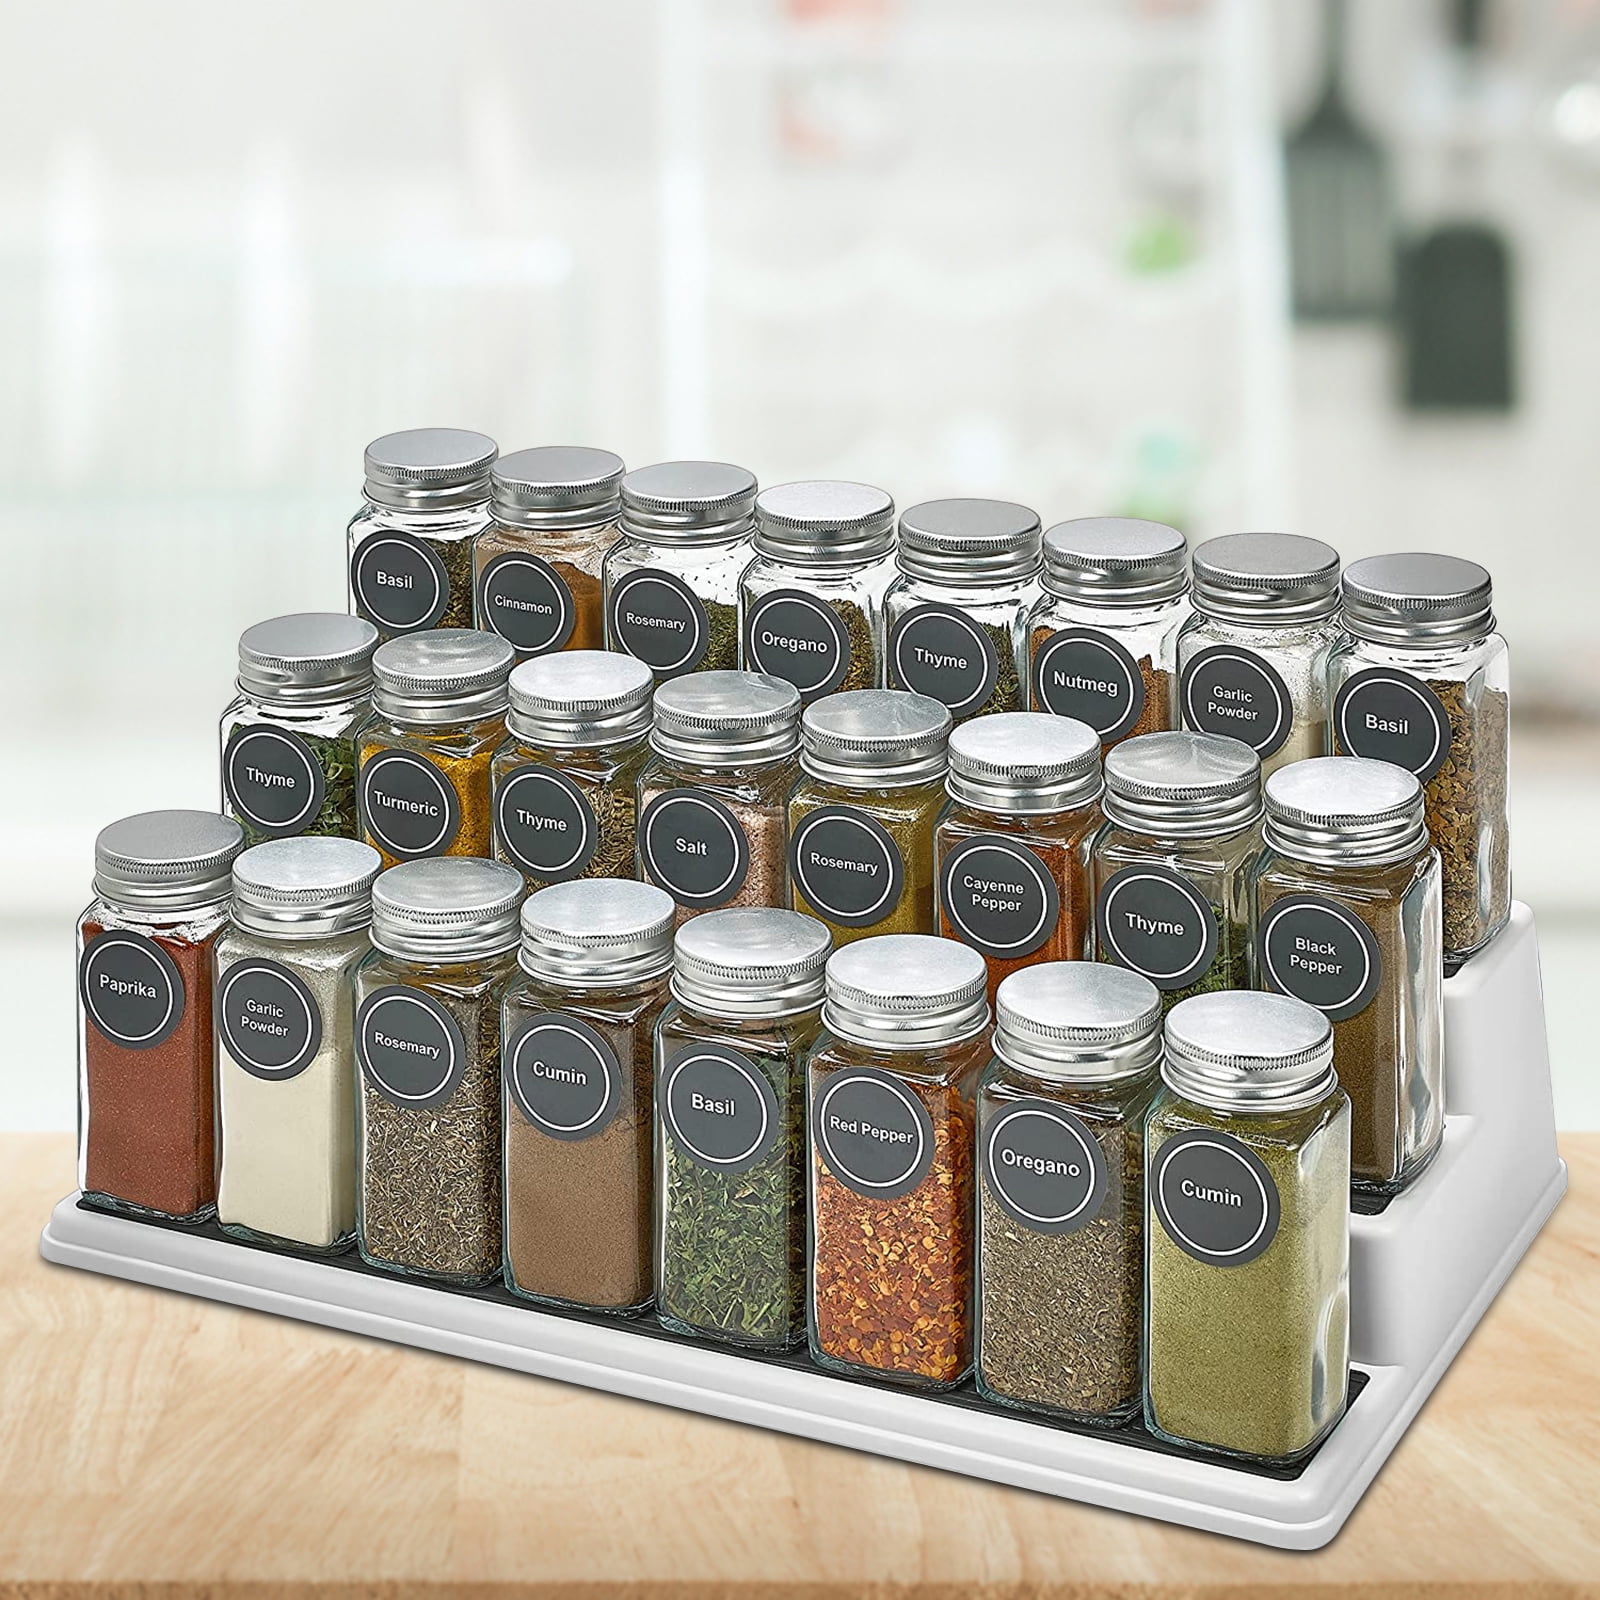 🔥STONEKAE 25 Pcs Glass Spice Jars- Square Glass Containers With